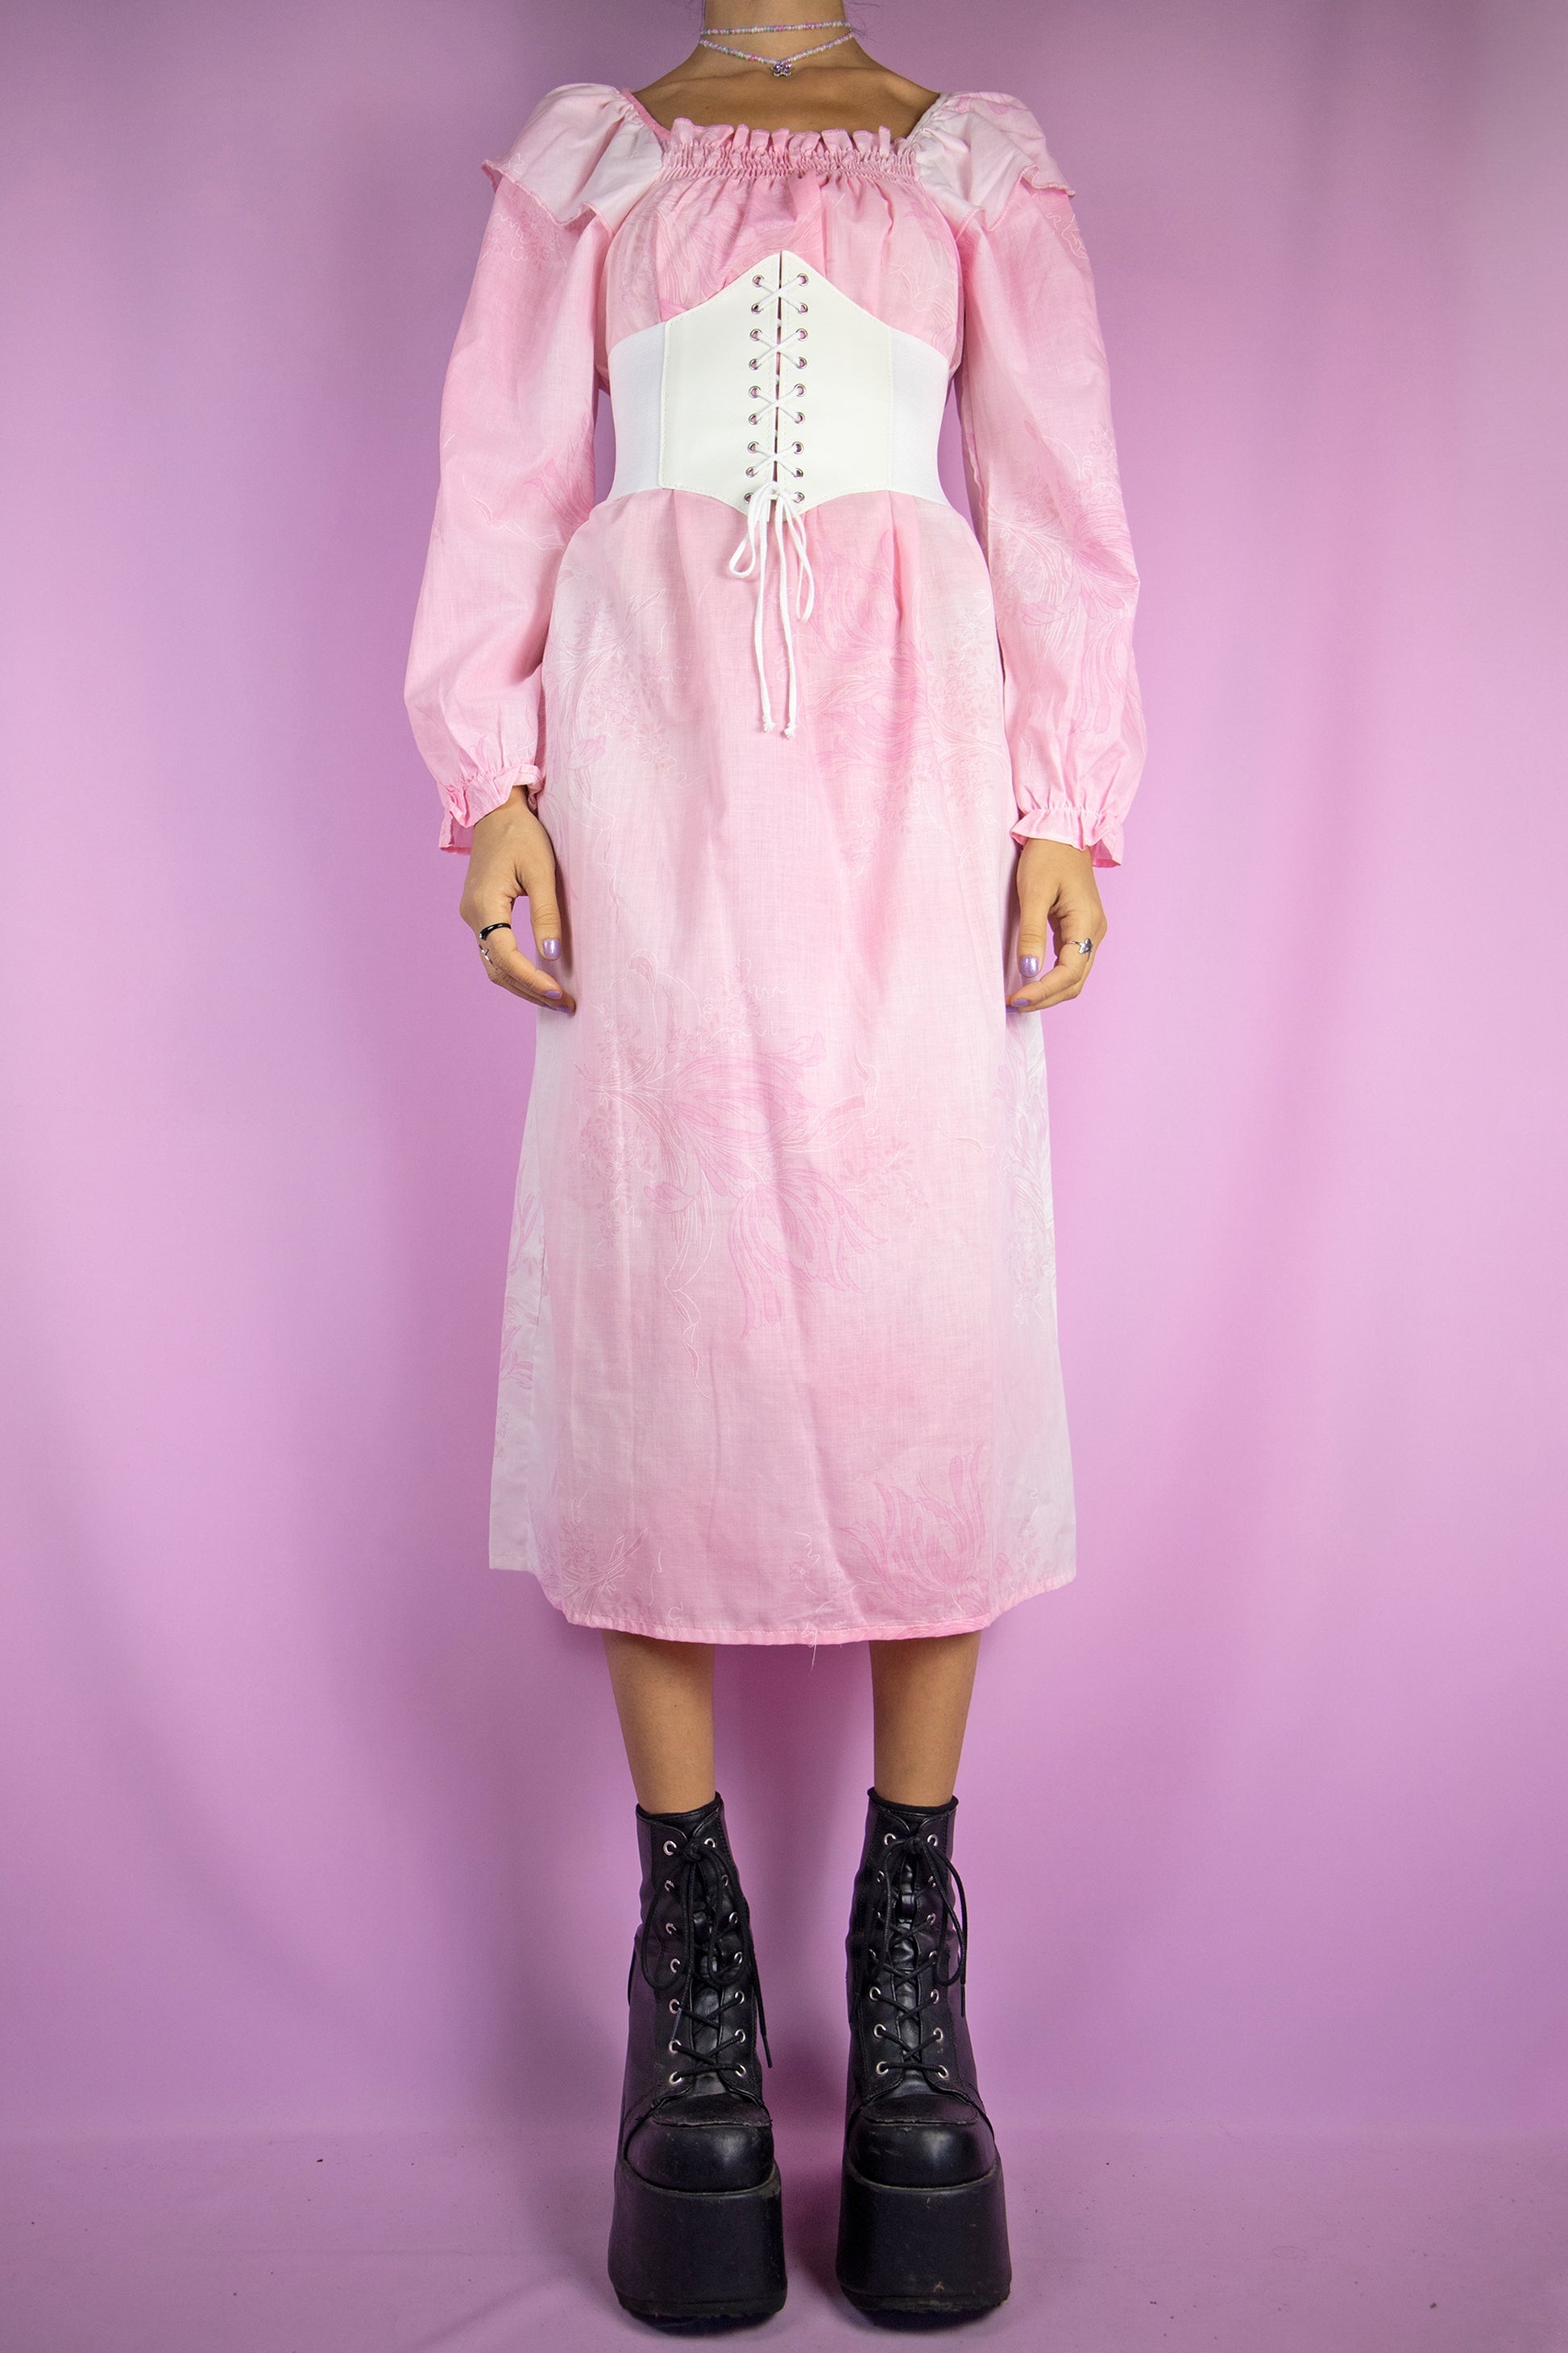 The Vintage 80s Pink Long Sleeve Nightgown Dress is a pastel light pink floral long sleeve midi dress with ruched front. Gorgeous romantic cottage prairie inspired sleepwear 1980s night dress. The white corset shown in the pictures is not included.